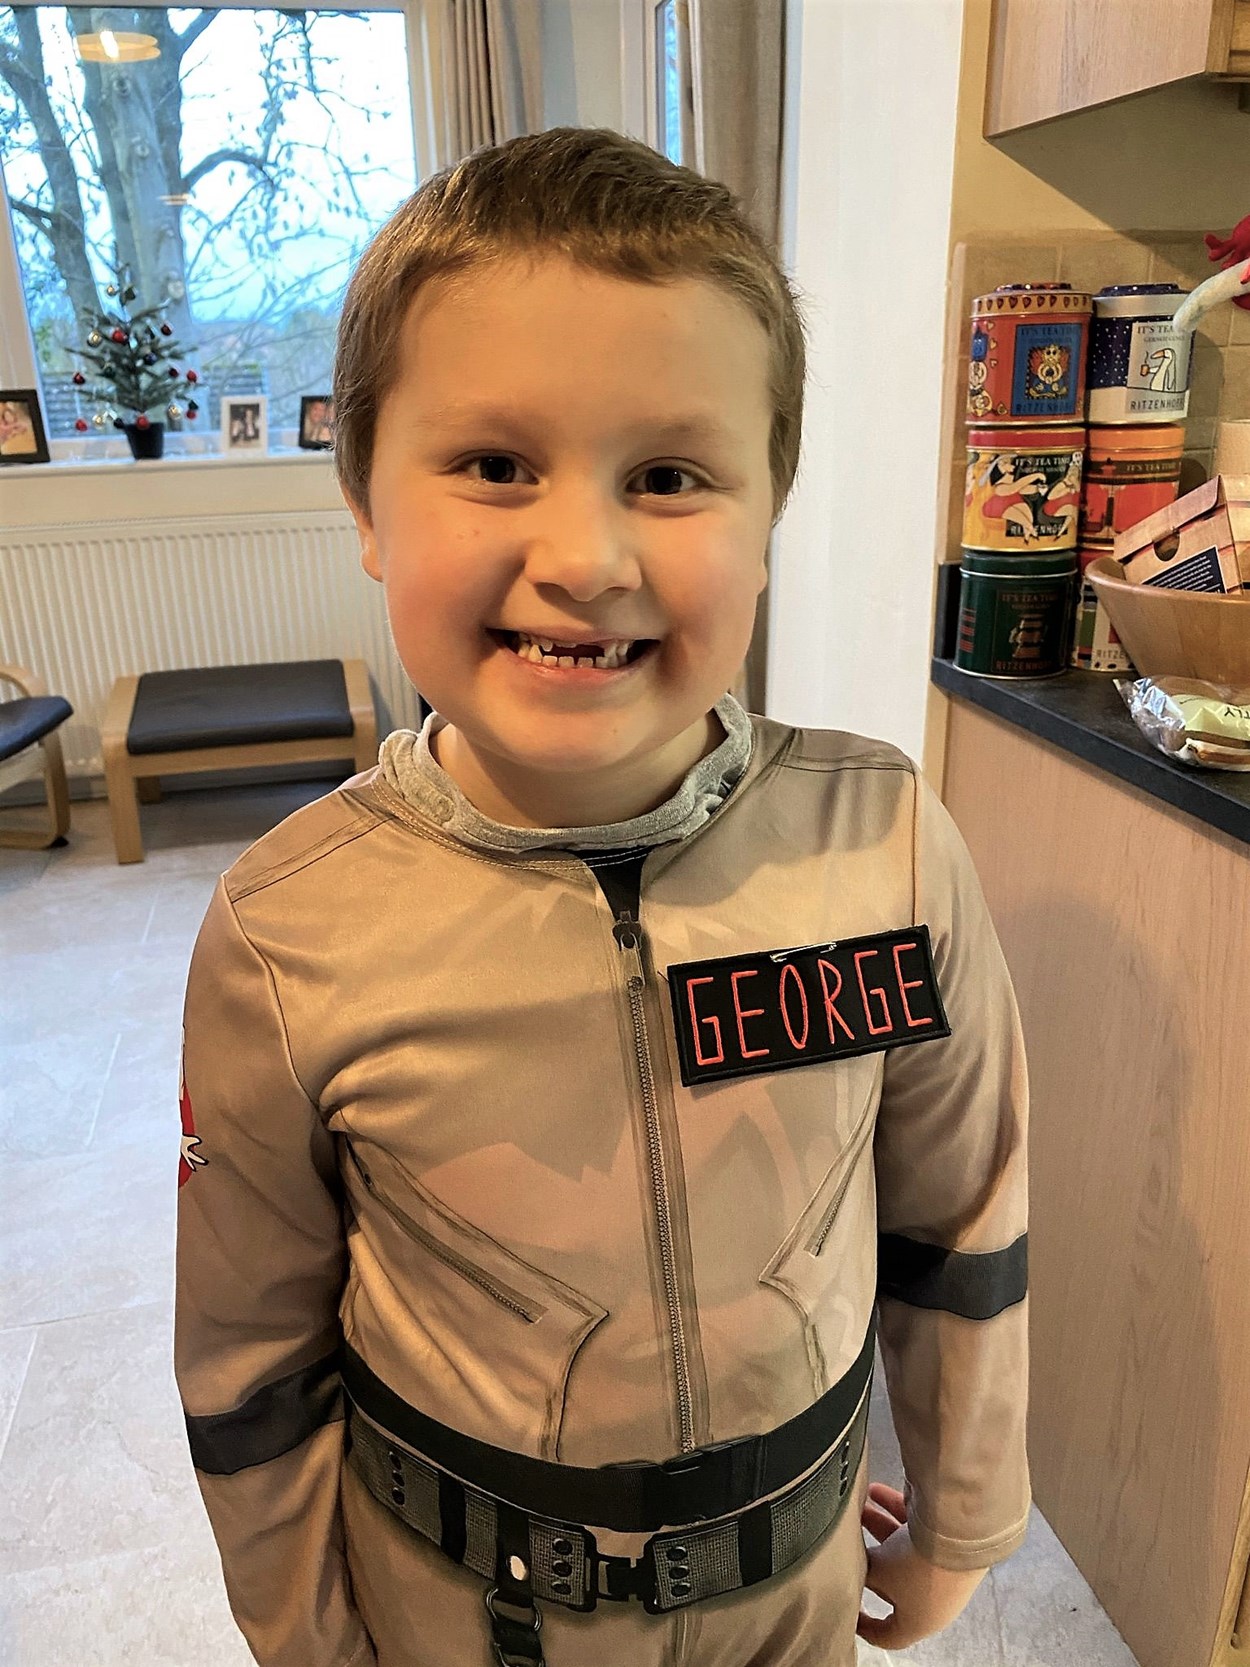 George is strapping on his proton pack and hunting down ghouls in an action-packed day, thanks to Leeds Libraries and the charity Make-A-Wish.